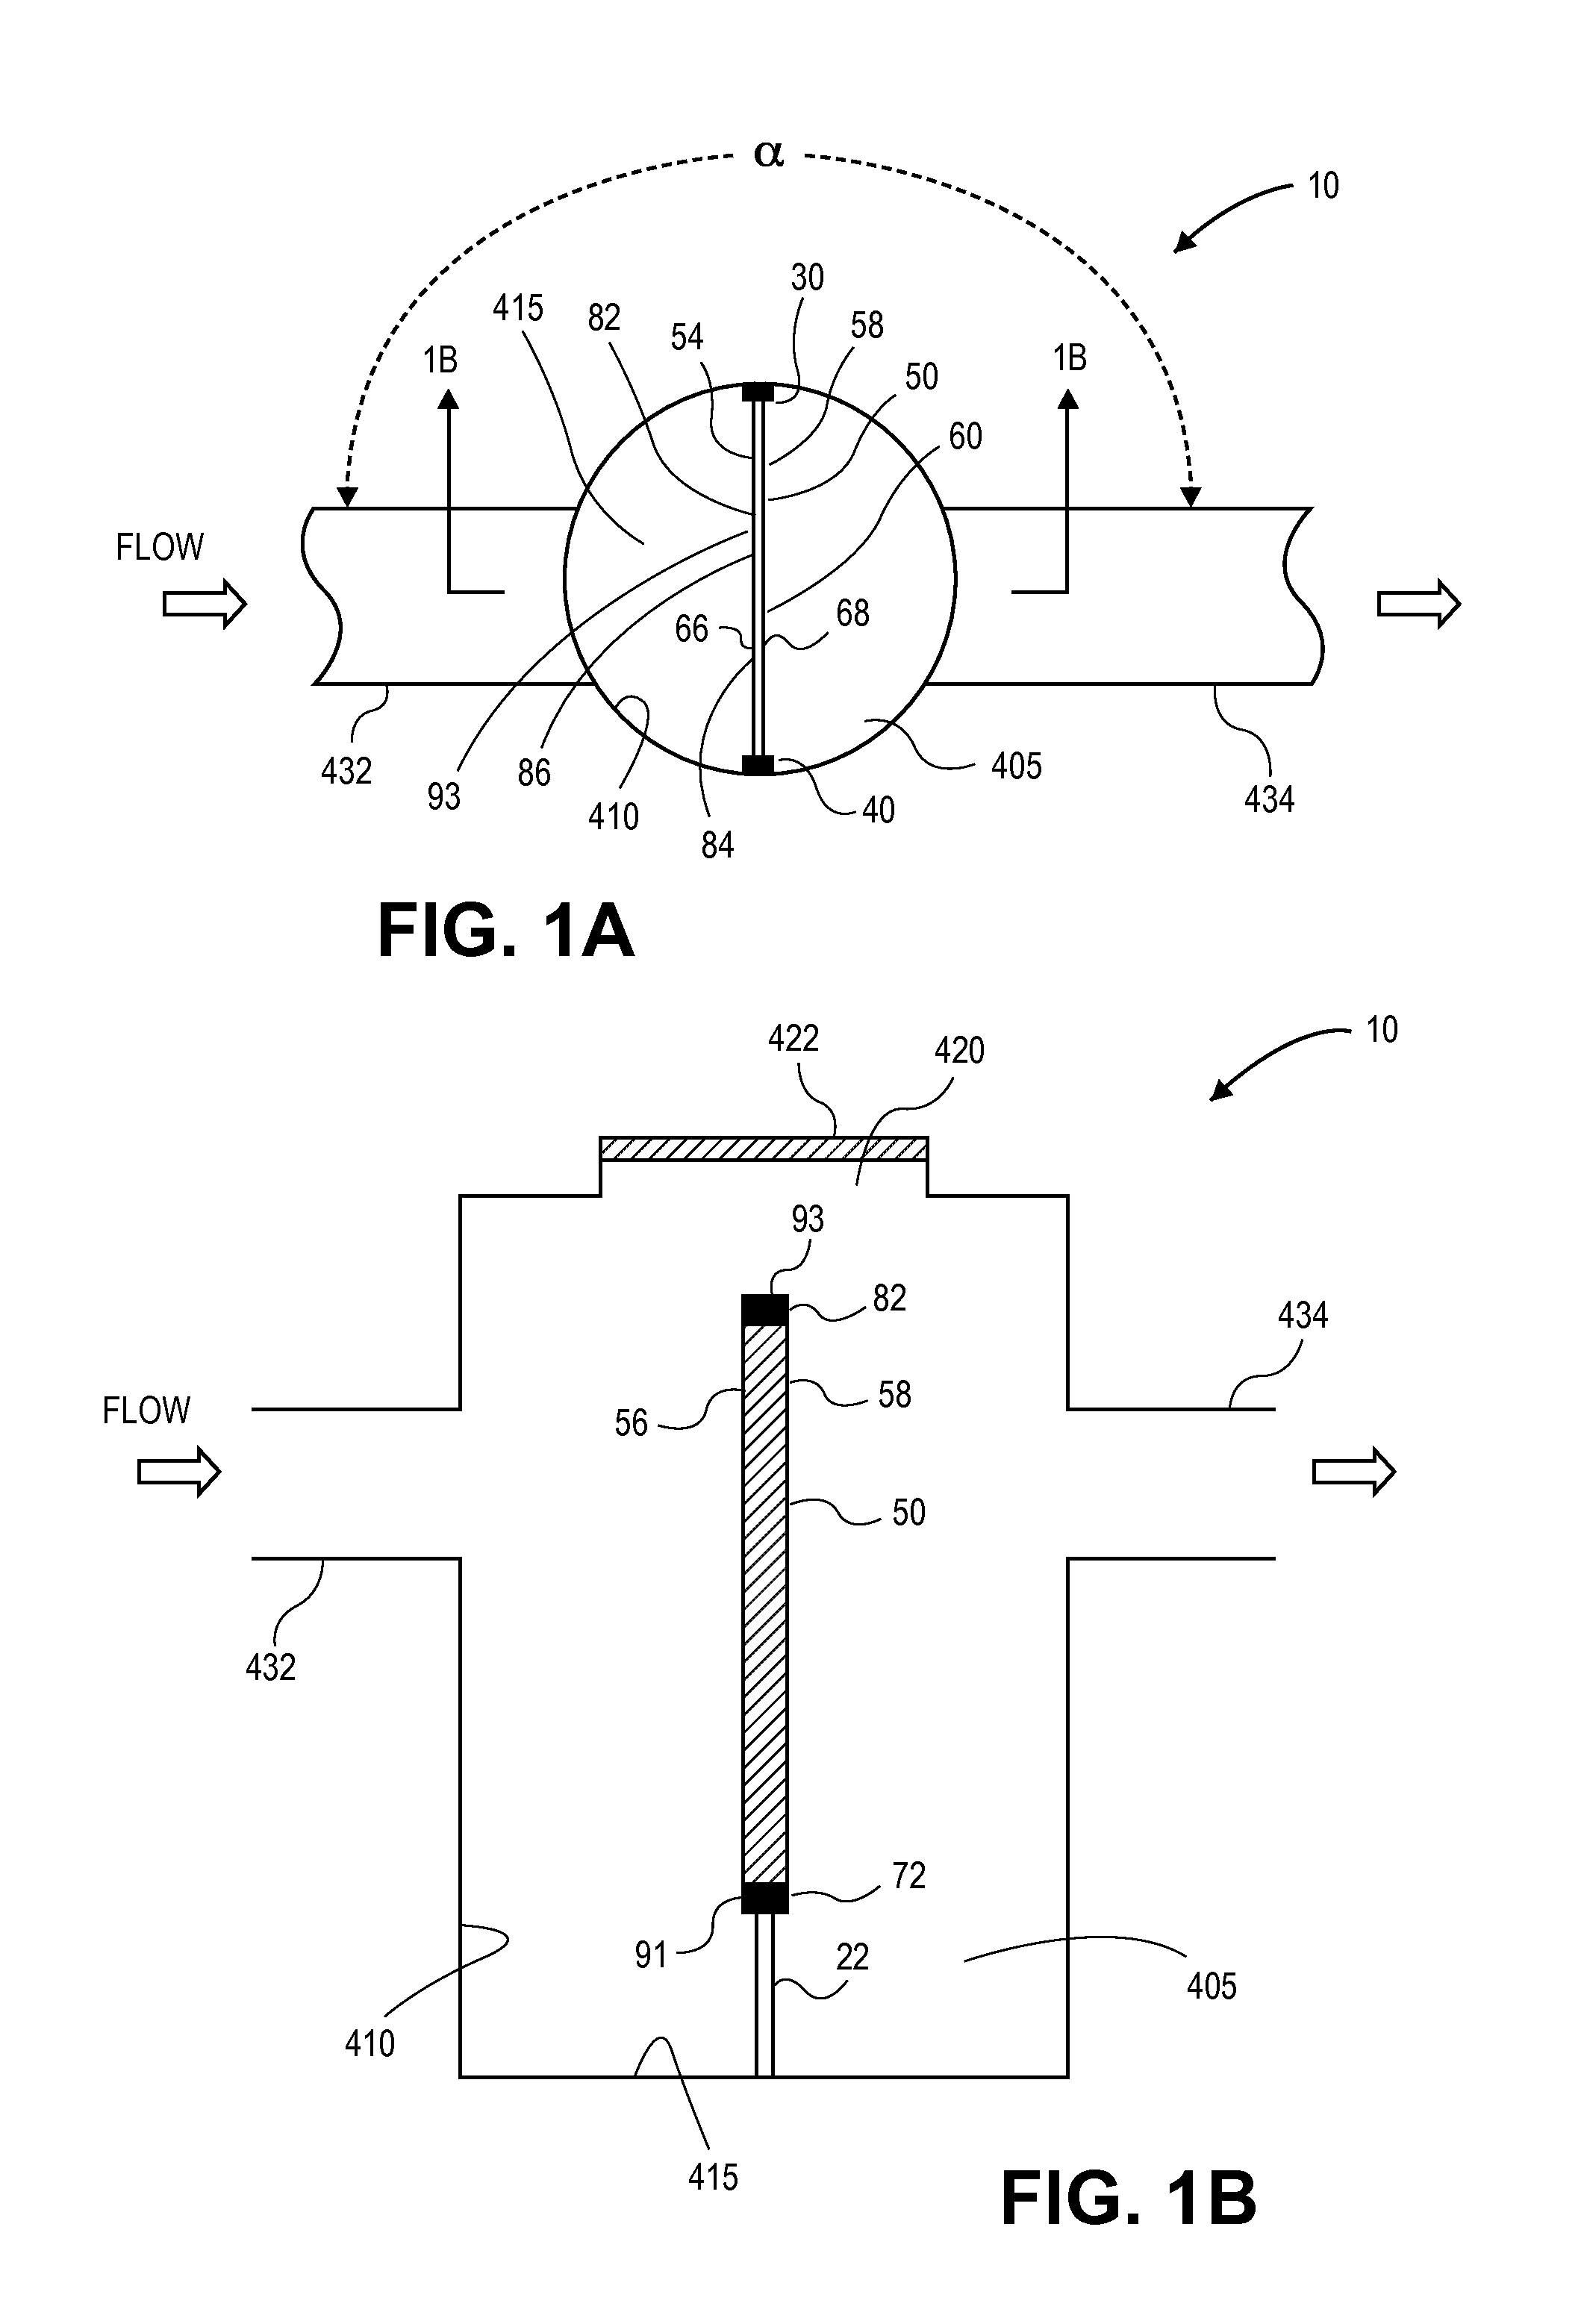 Flow baffle installation methods and apparatus